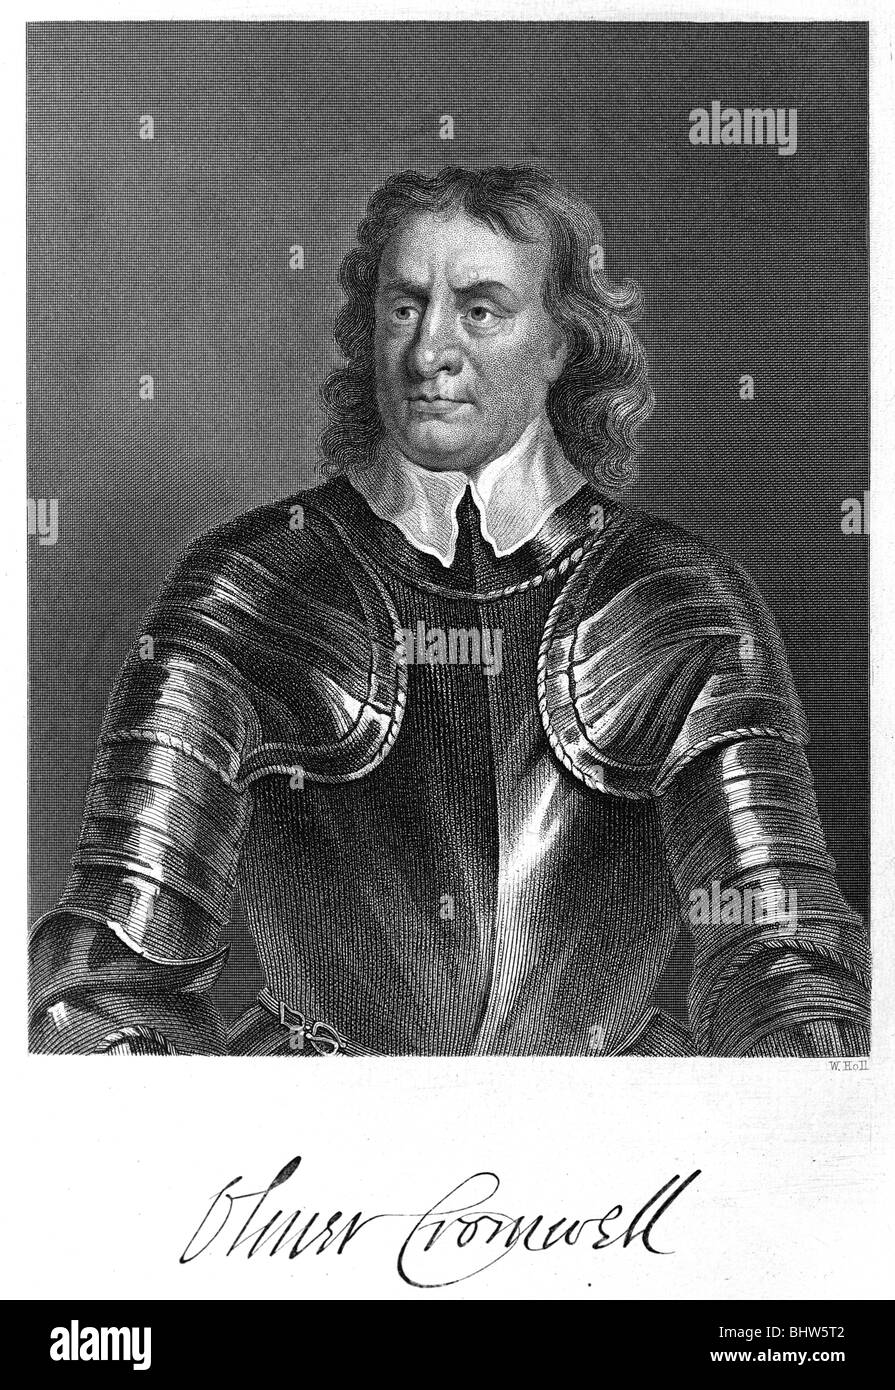 Oliver Cromwell Banque D'Images